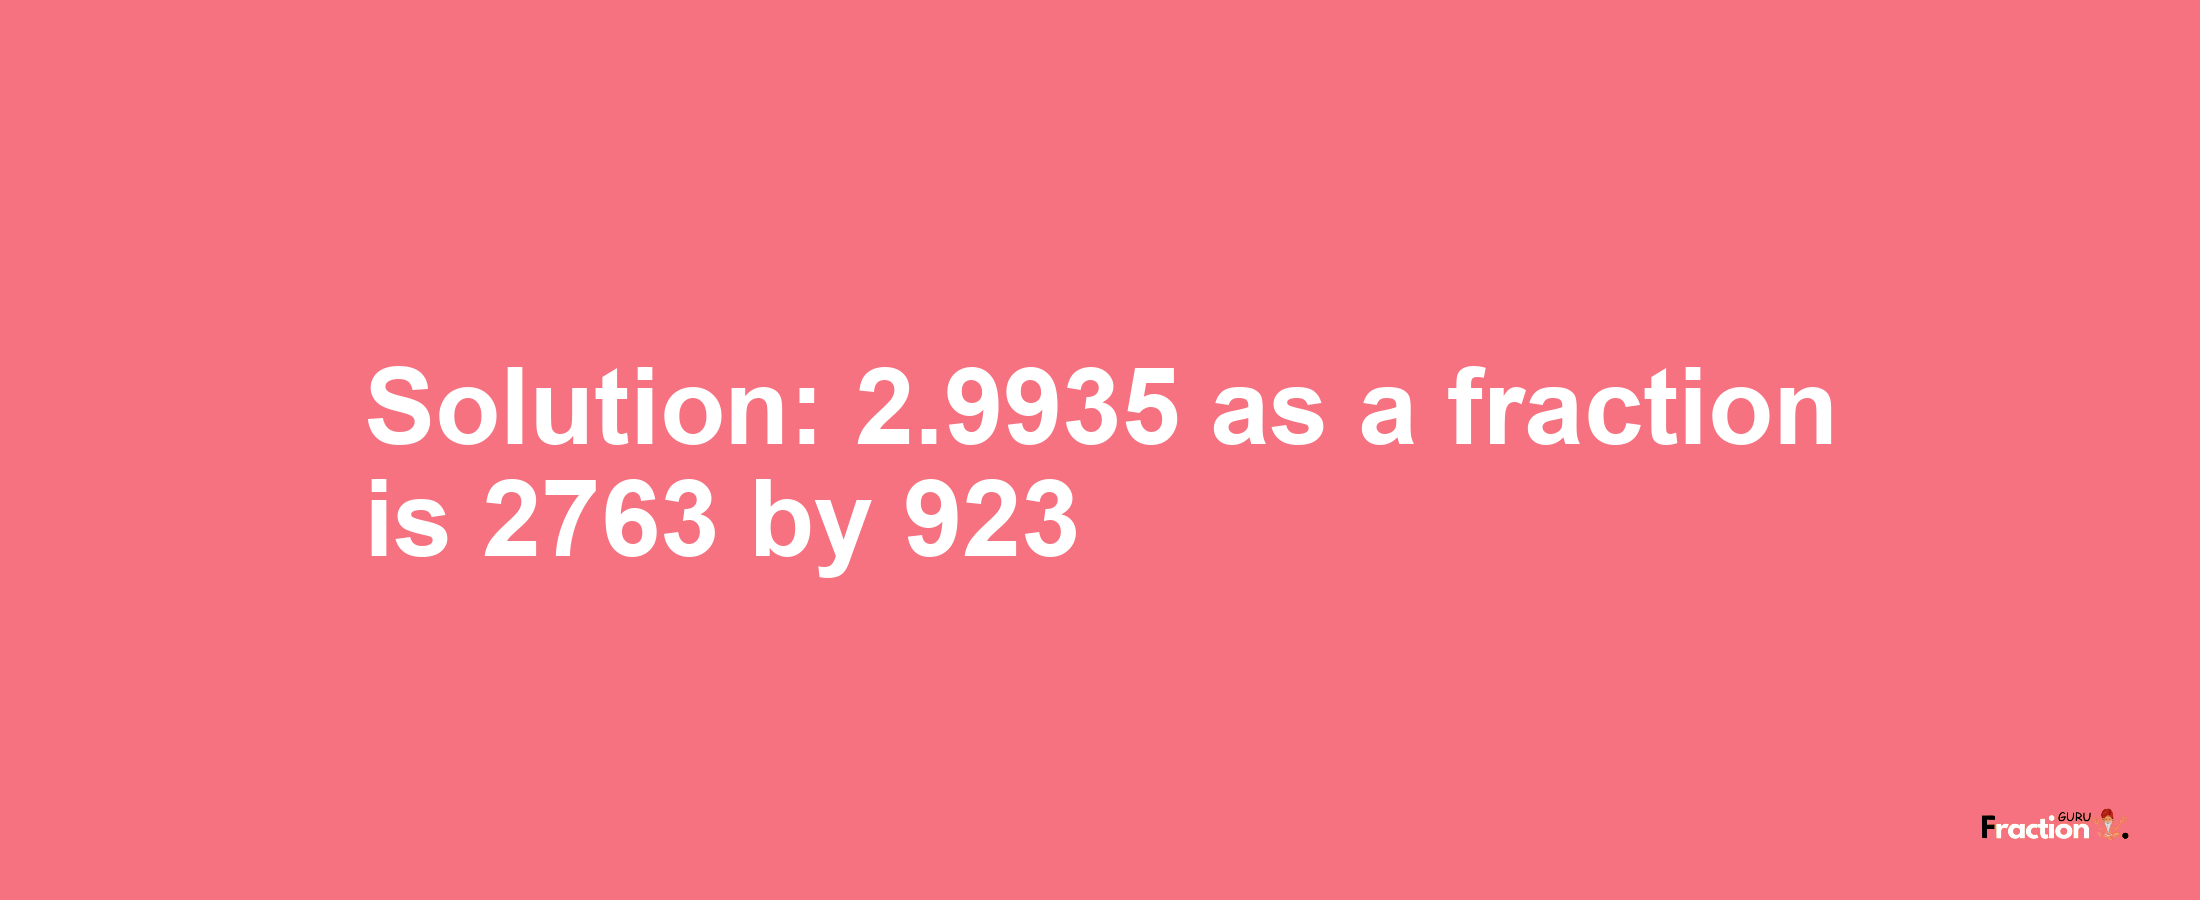 Solution:2.9935 as a fraction is 2763/923